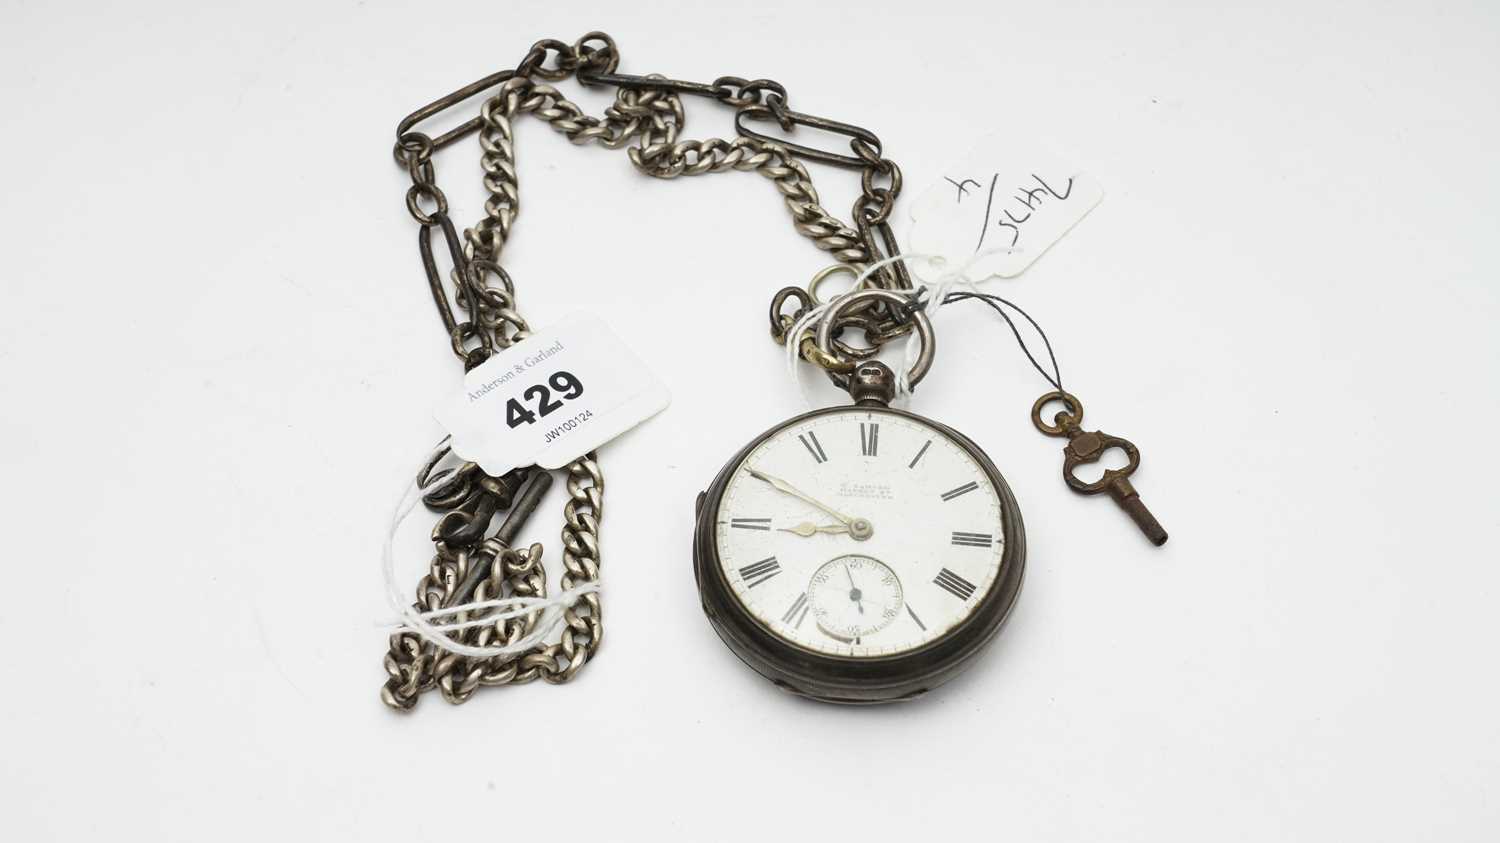 A silver case open-faced pocket watch and chains